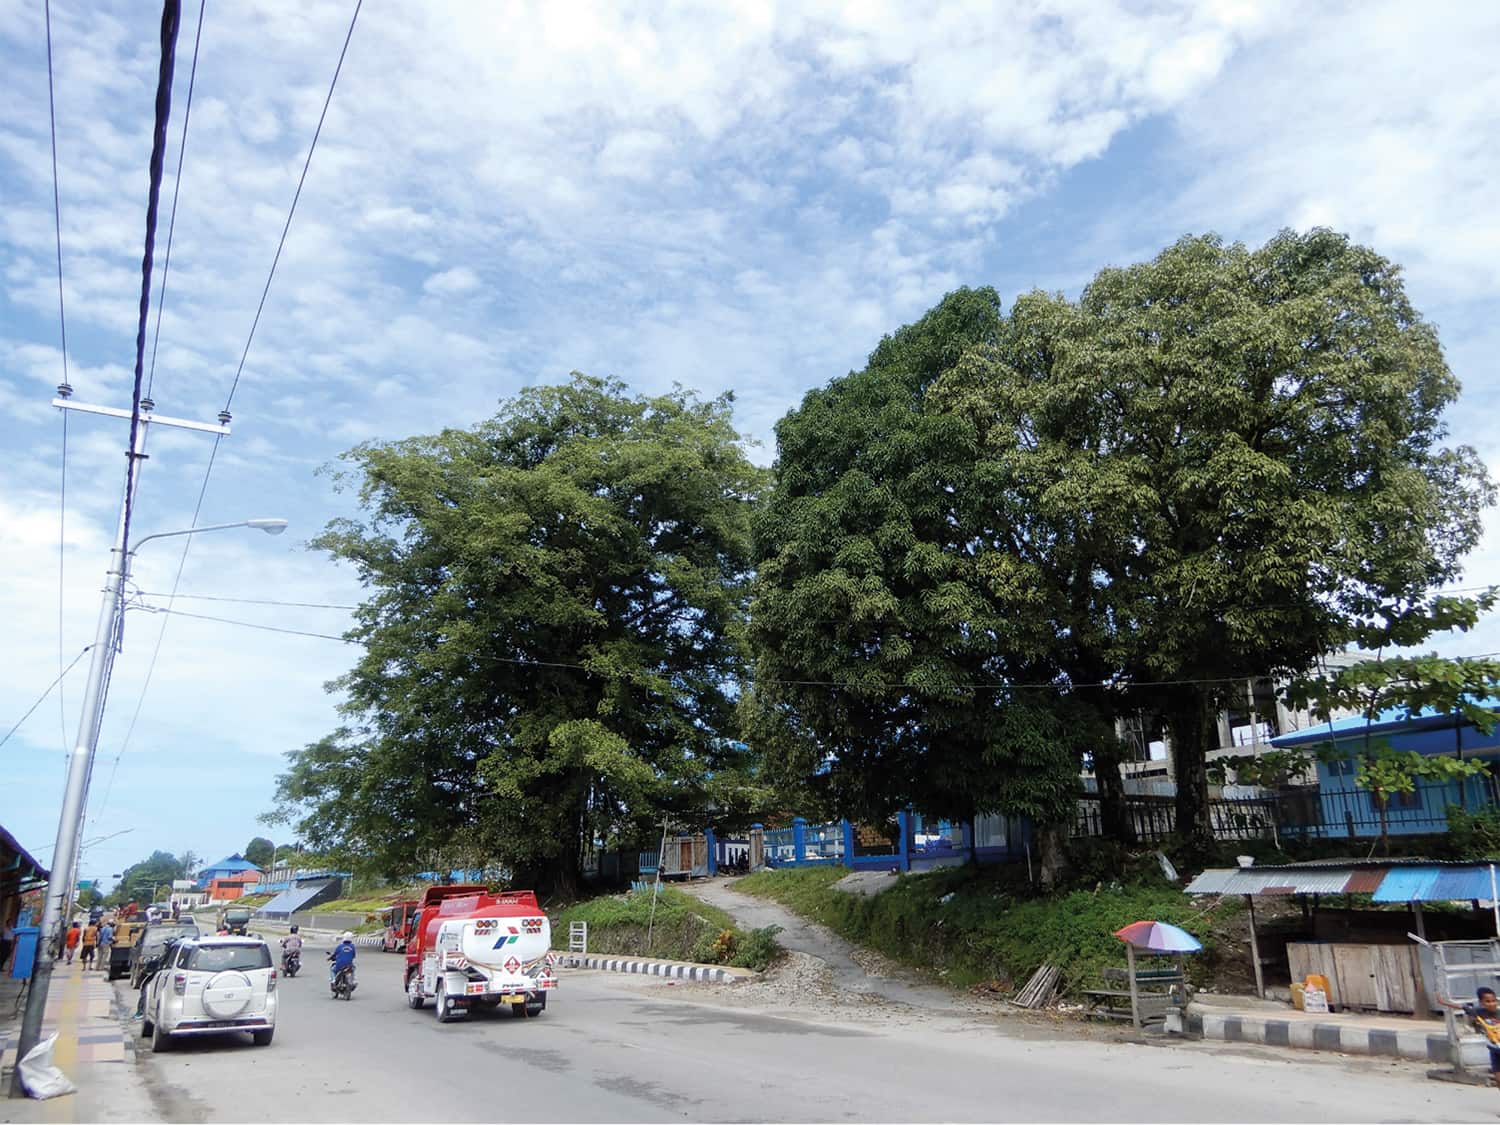 Street trees in Biak, where improved urban forestry management is seen as one way to develop the island as a destination for ecotourism.